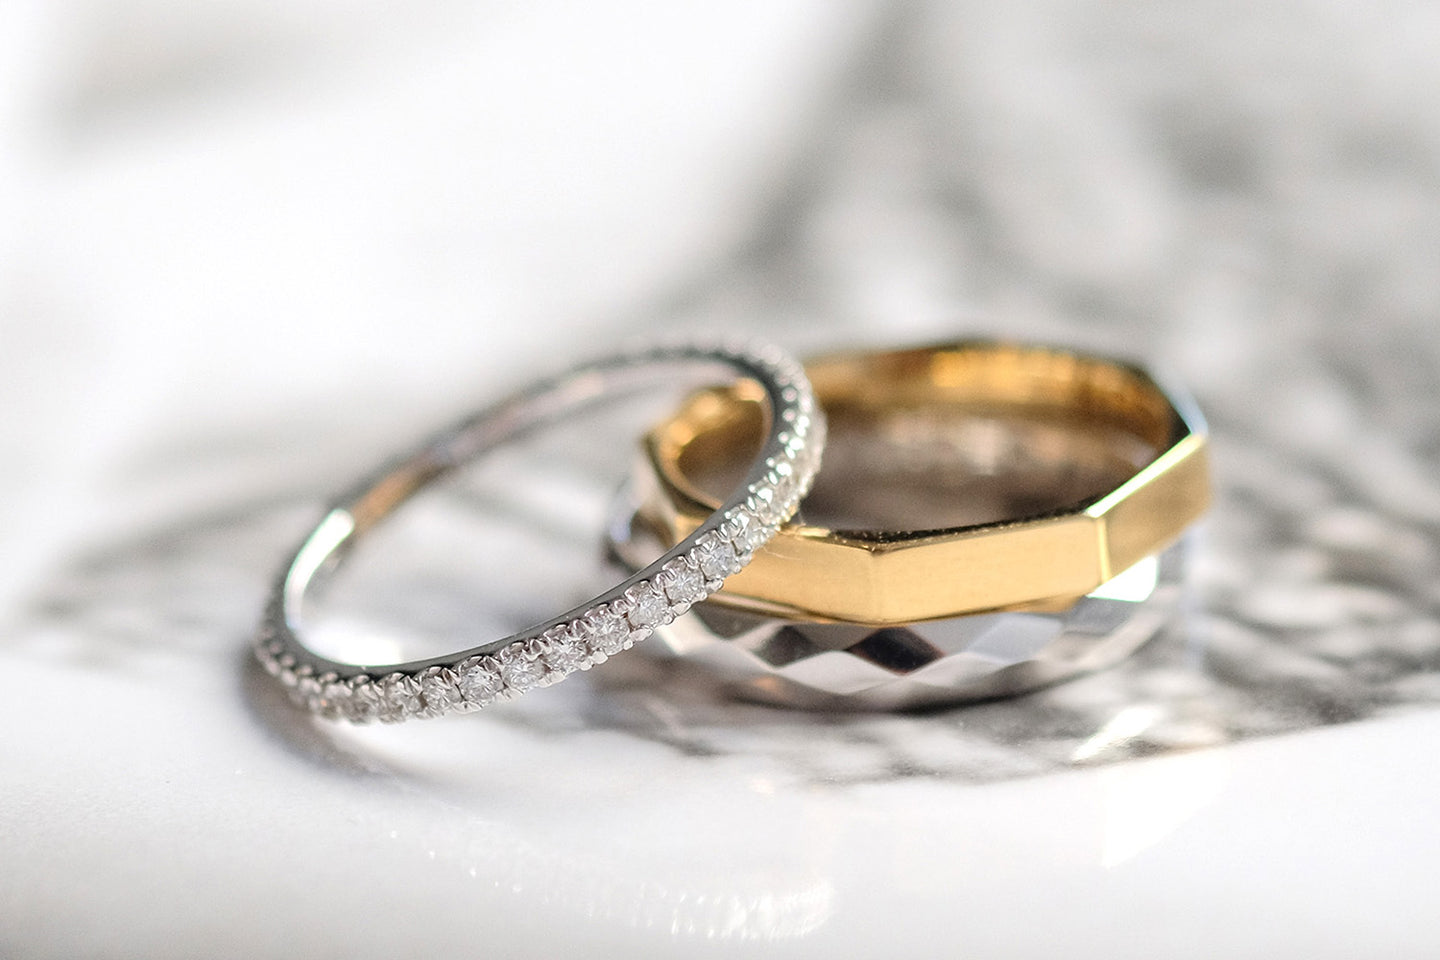 Sustainable Wedding Rings - and Our Efforts to Make Them